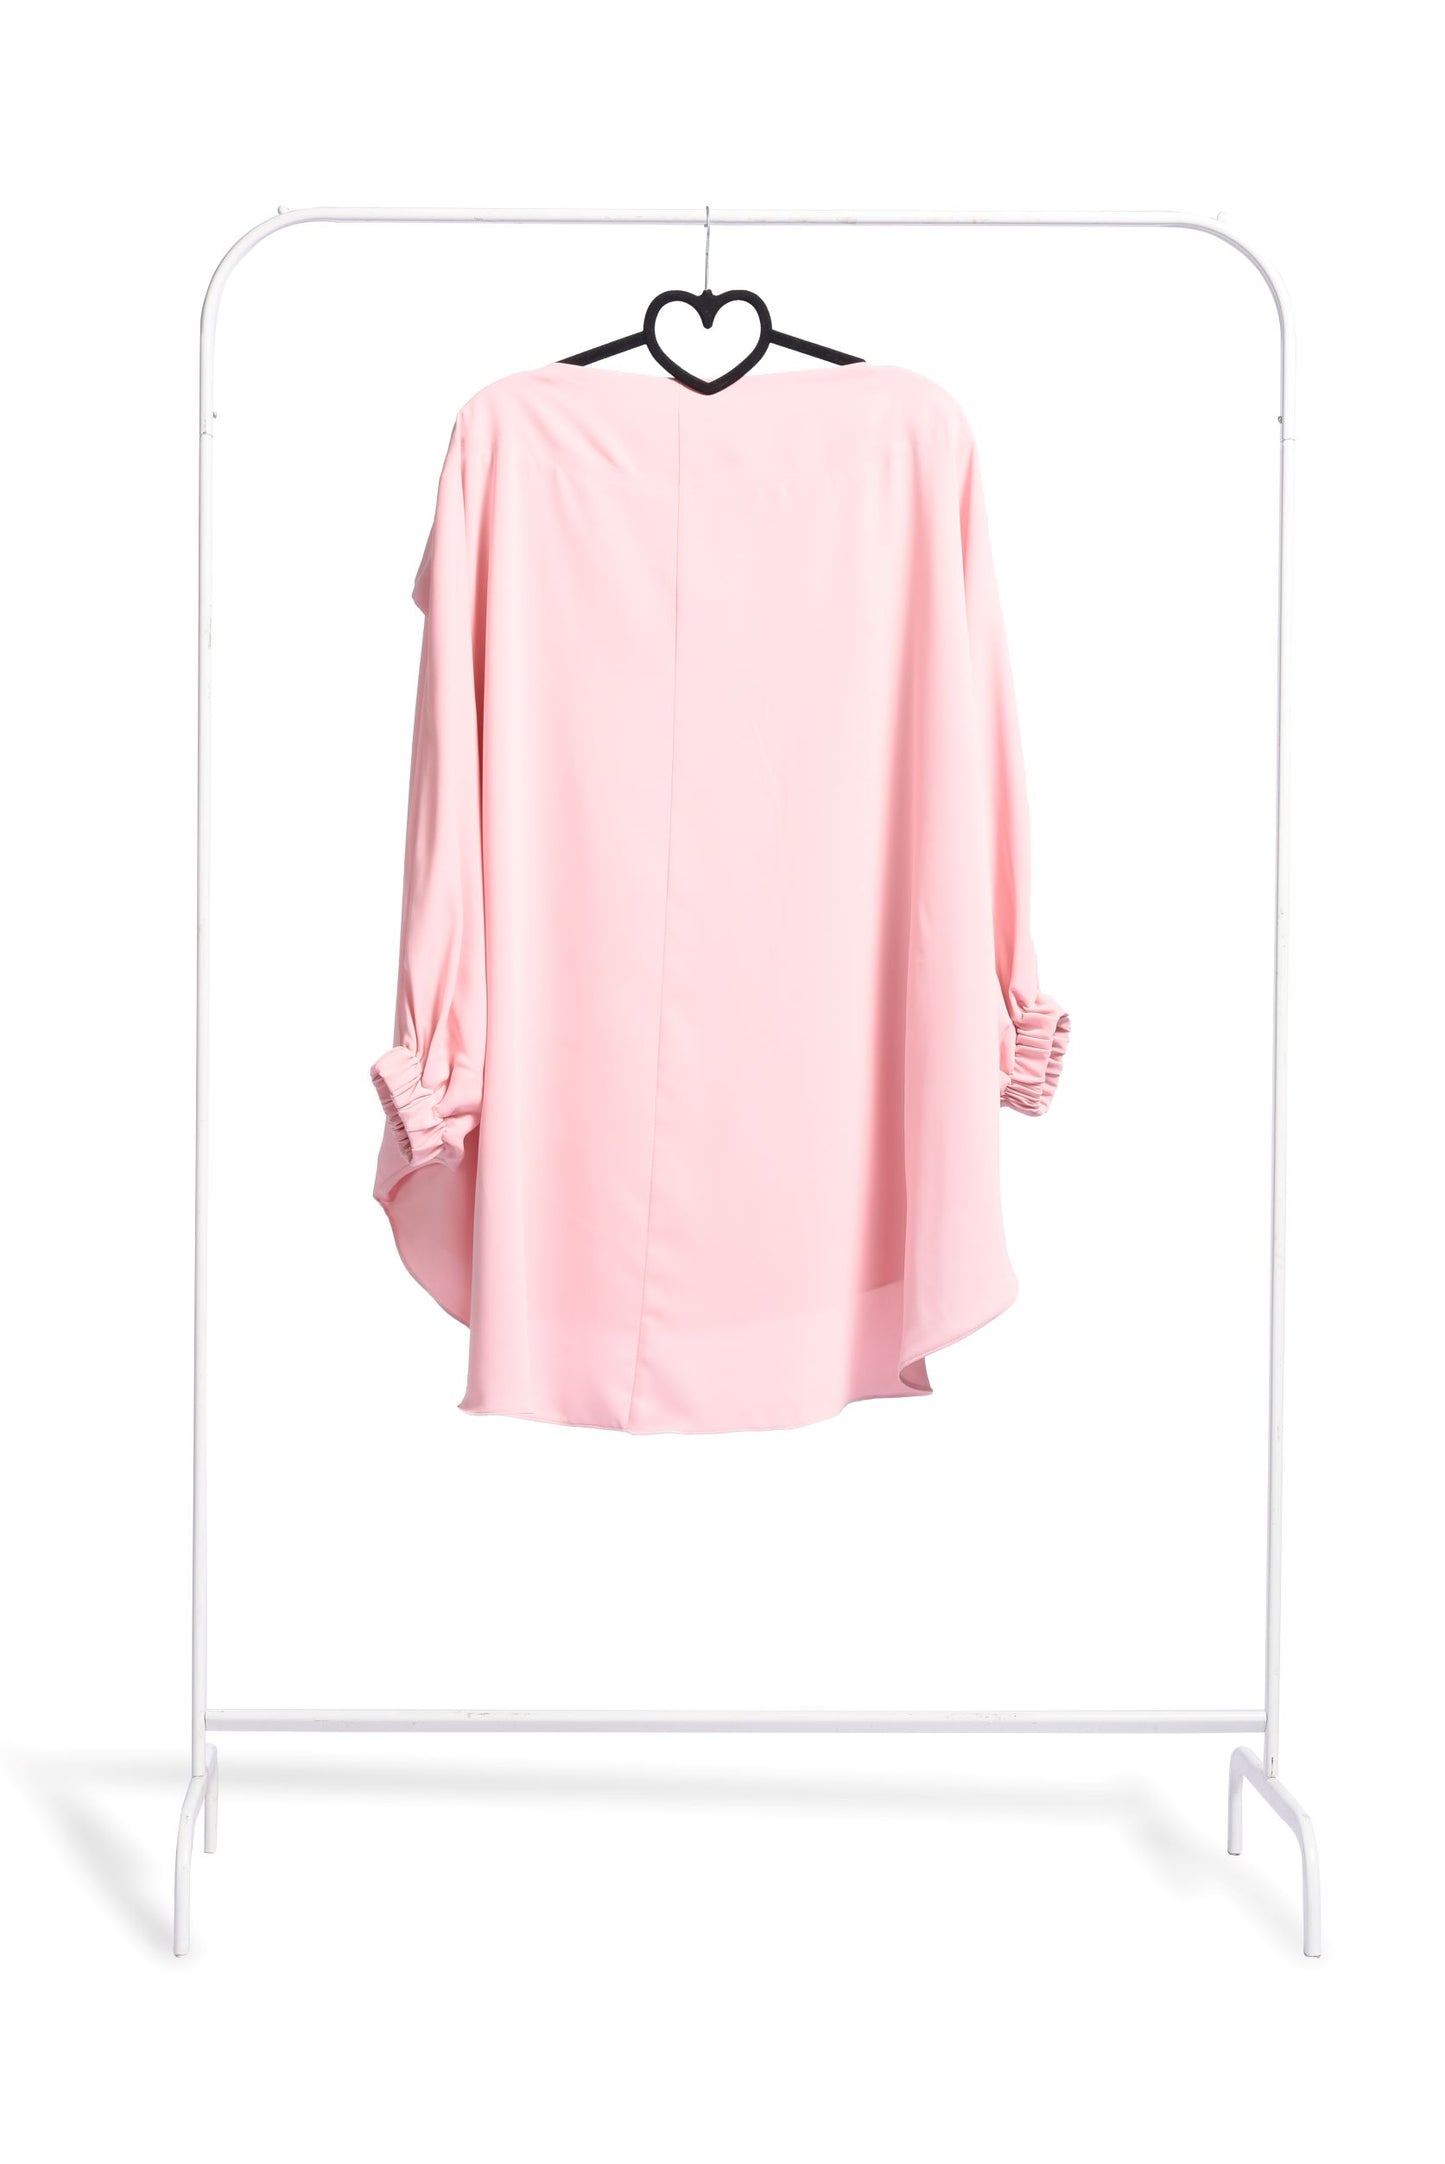 Pink Tie Front Oversized Batwing Top